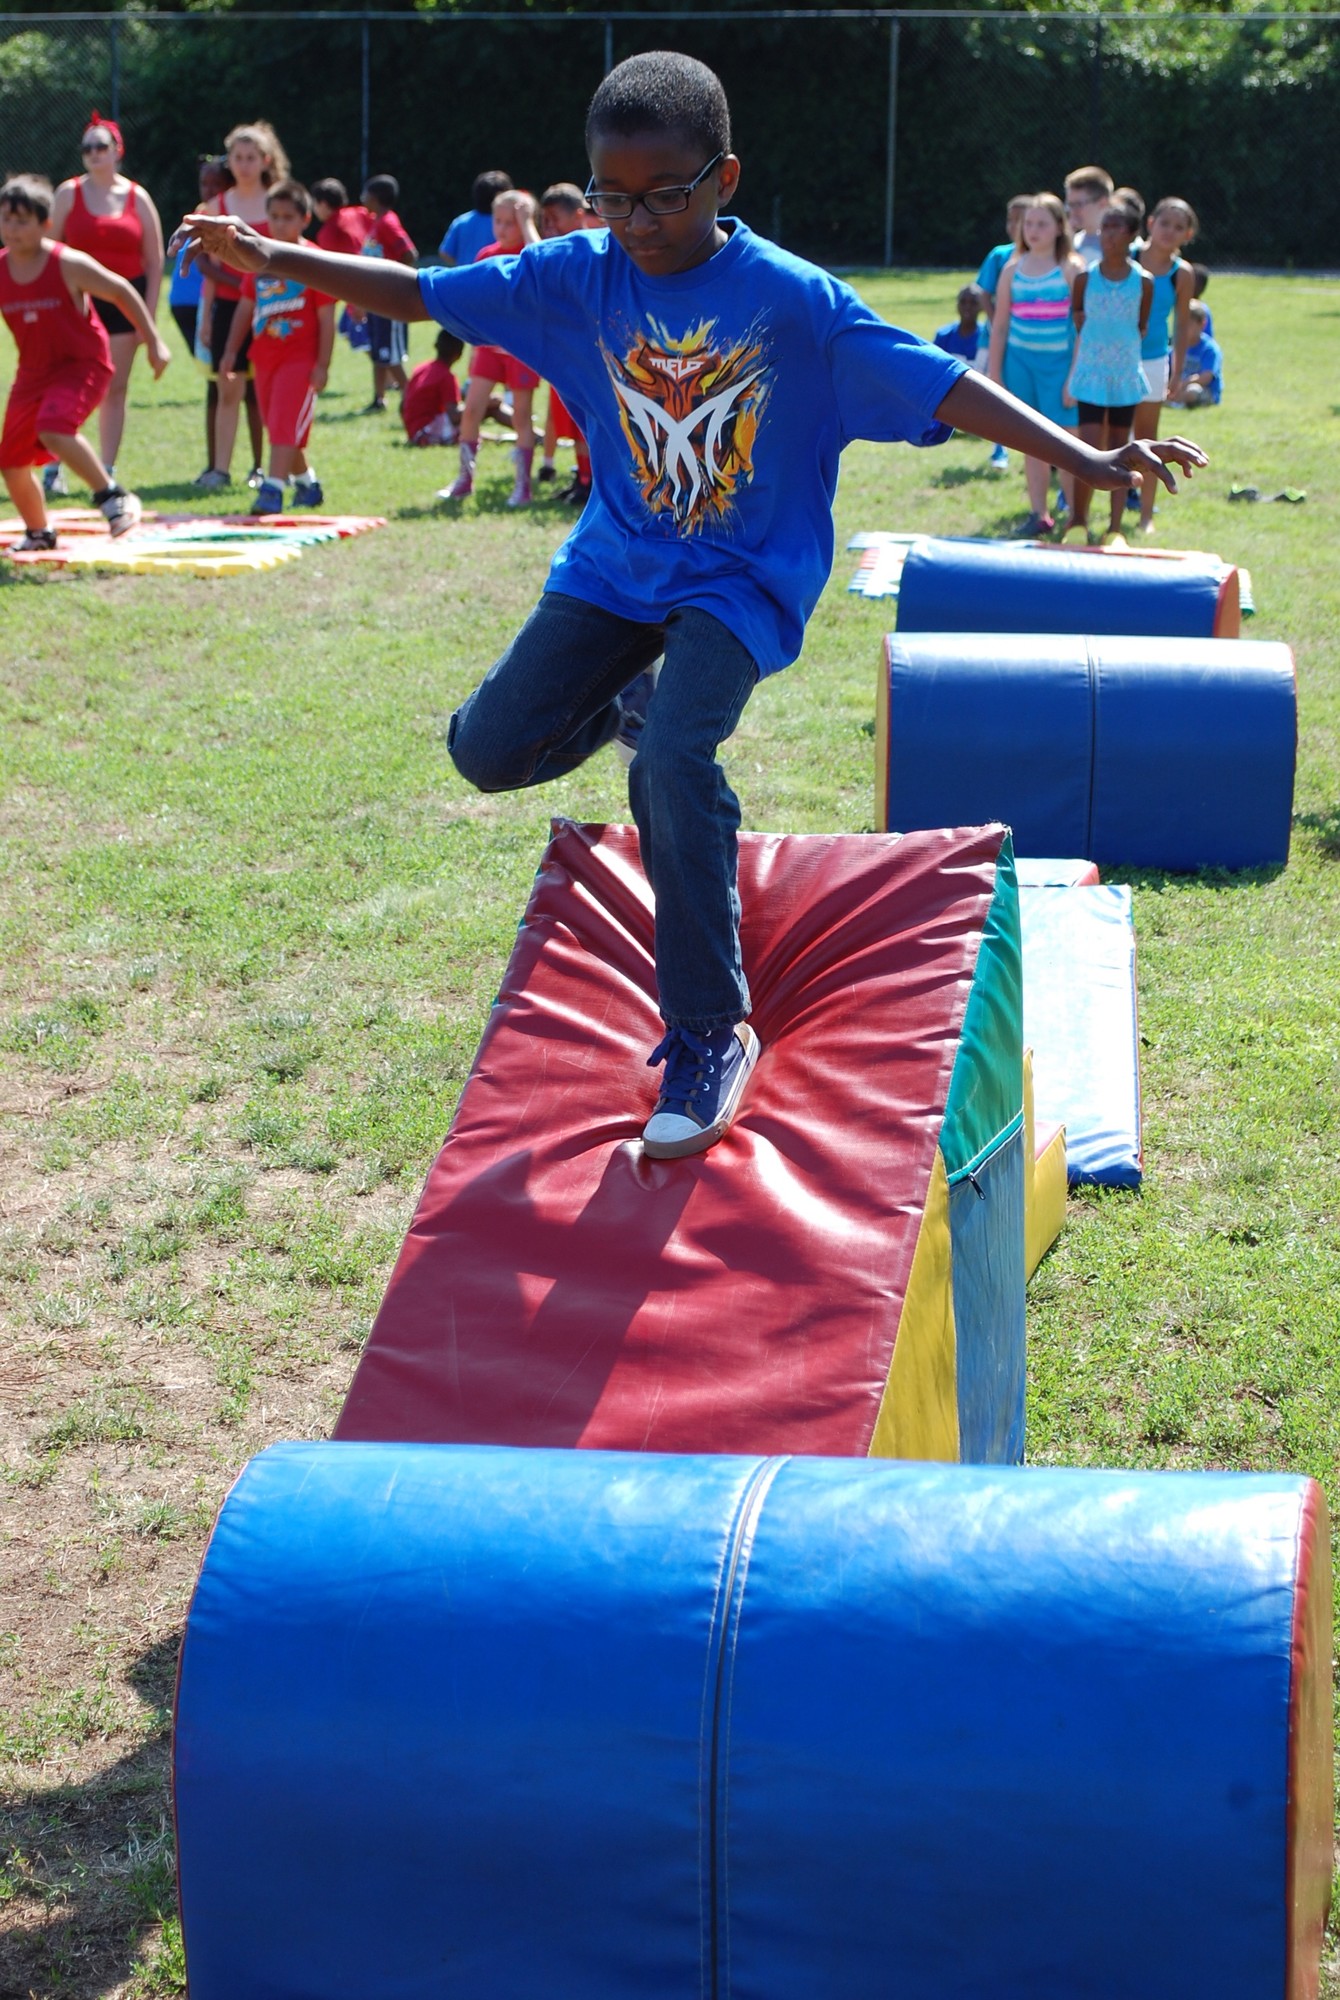 Brian Louis tackled the obstacle course.